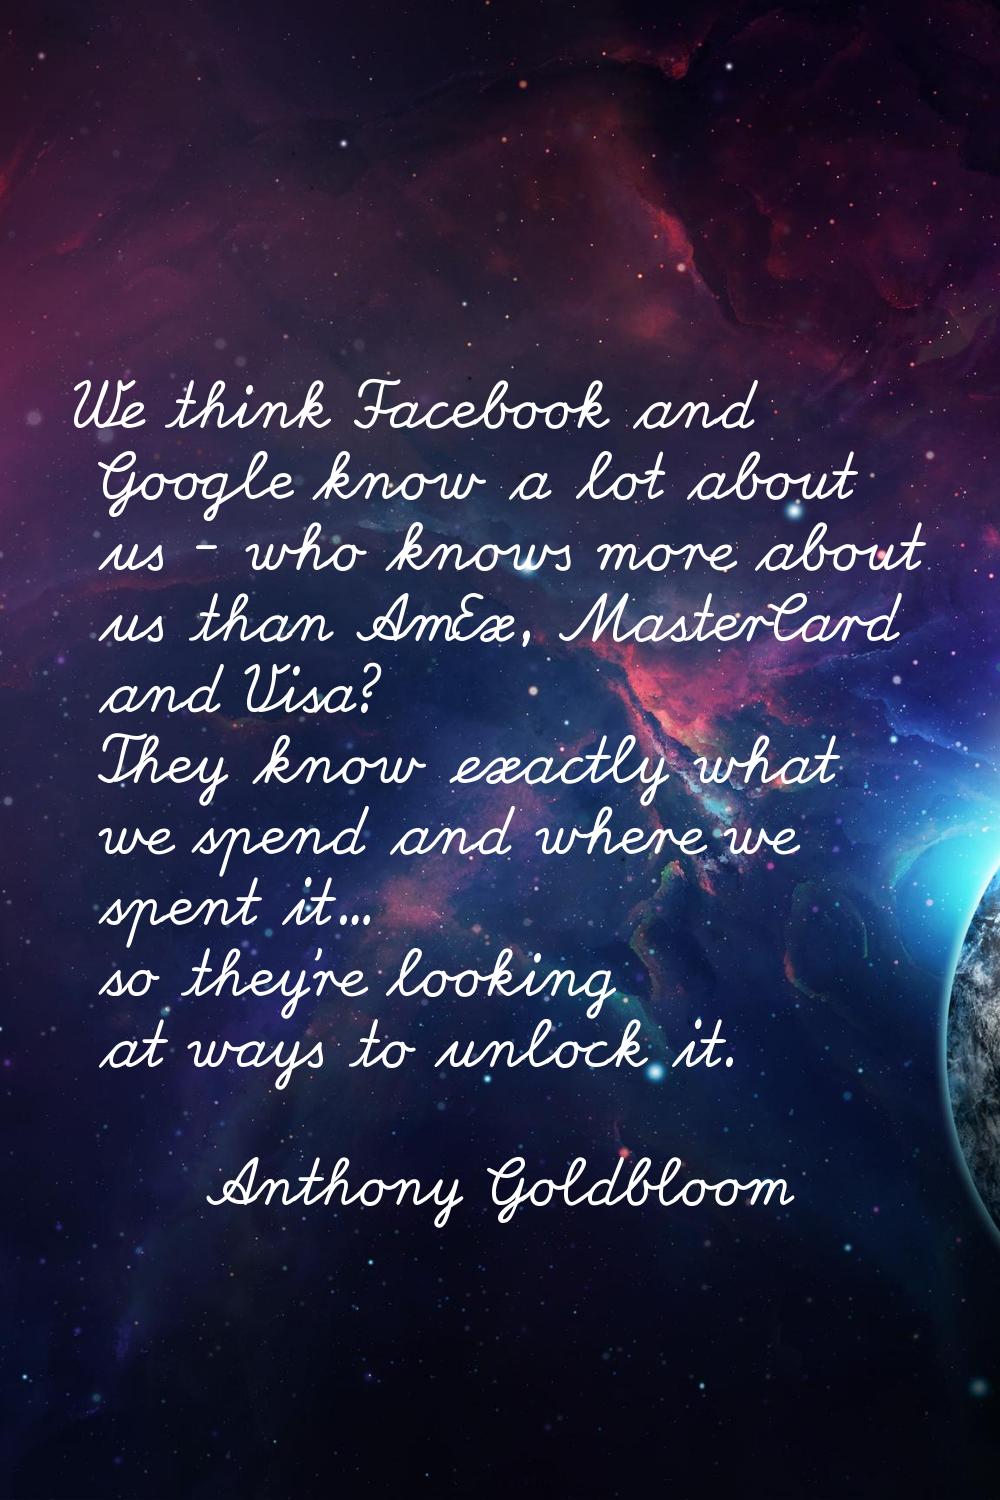 We think Facebook and Google know a lot about us - who knows more about us than AmEx, MasterCard an